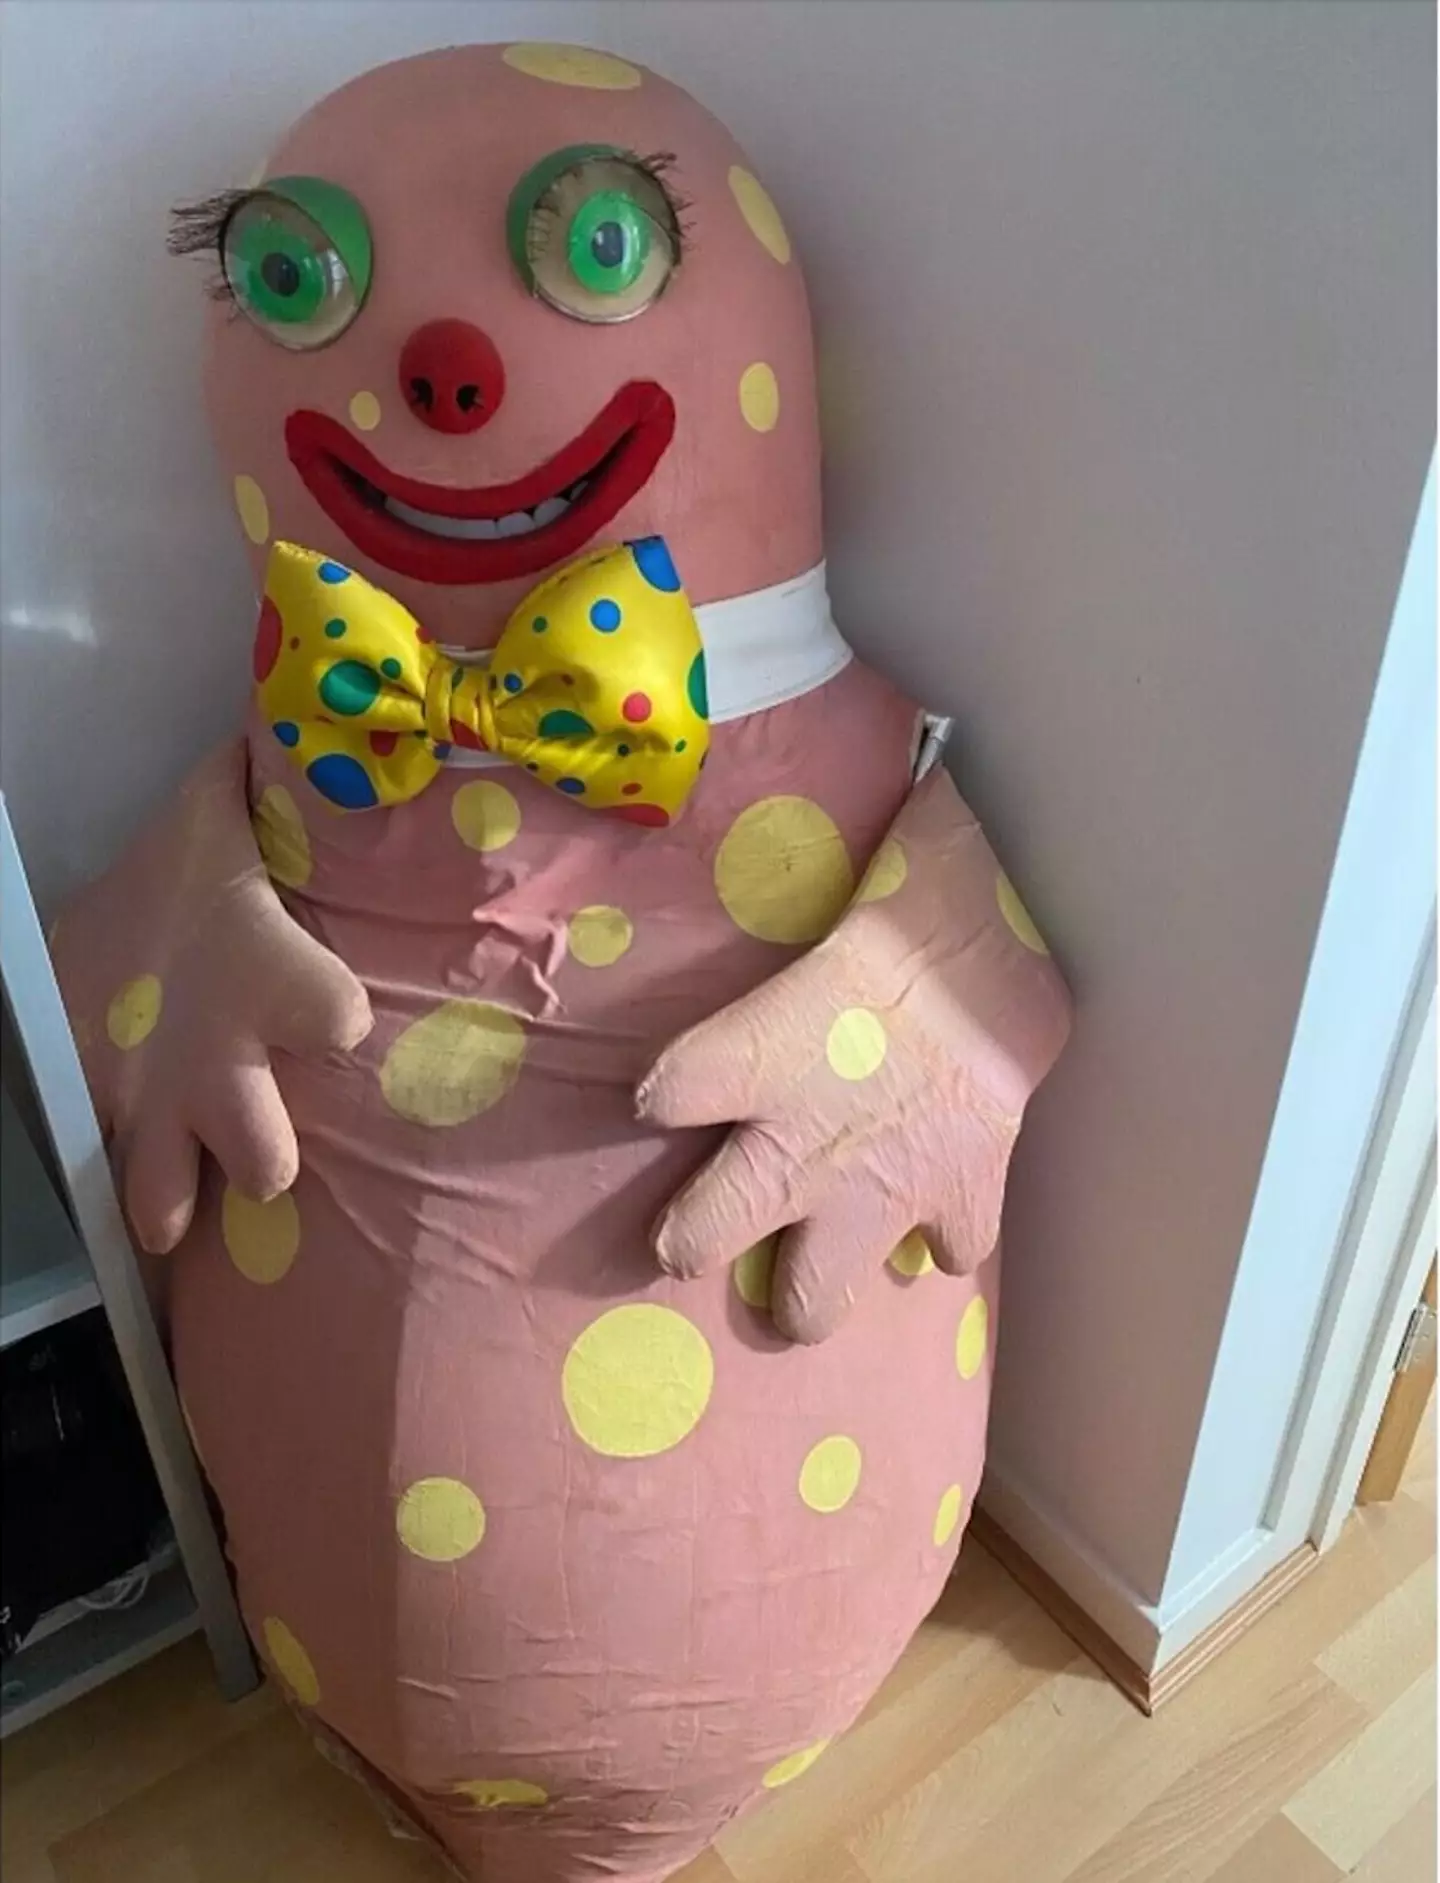 The Mr Blobby costume turned out to be goldmine.